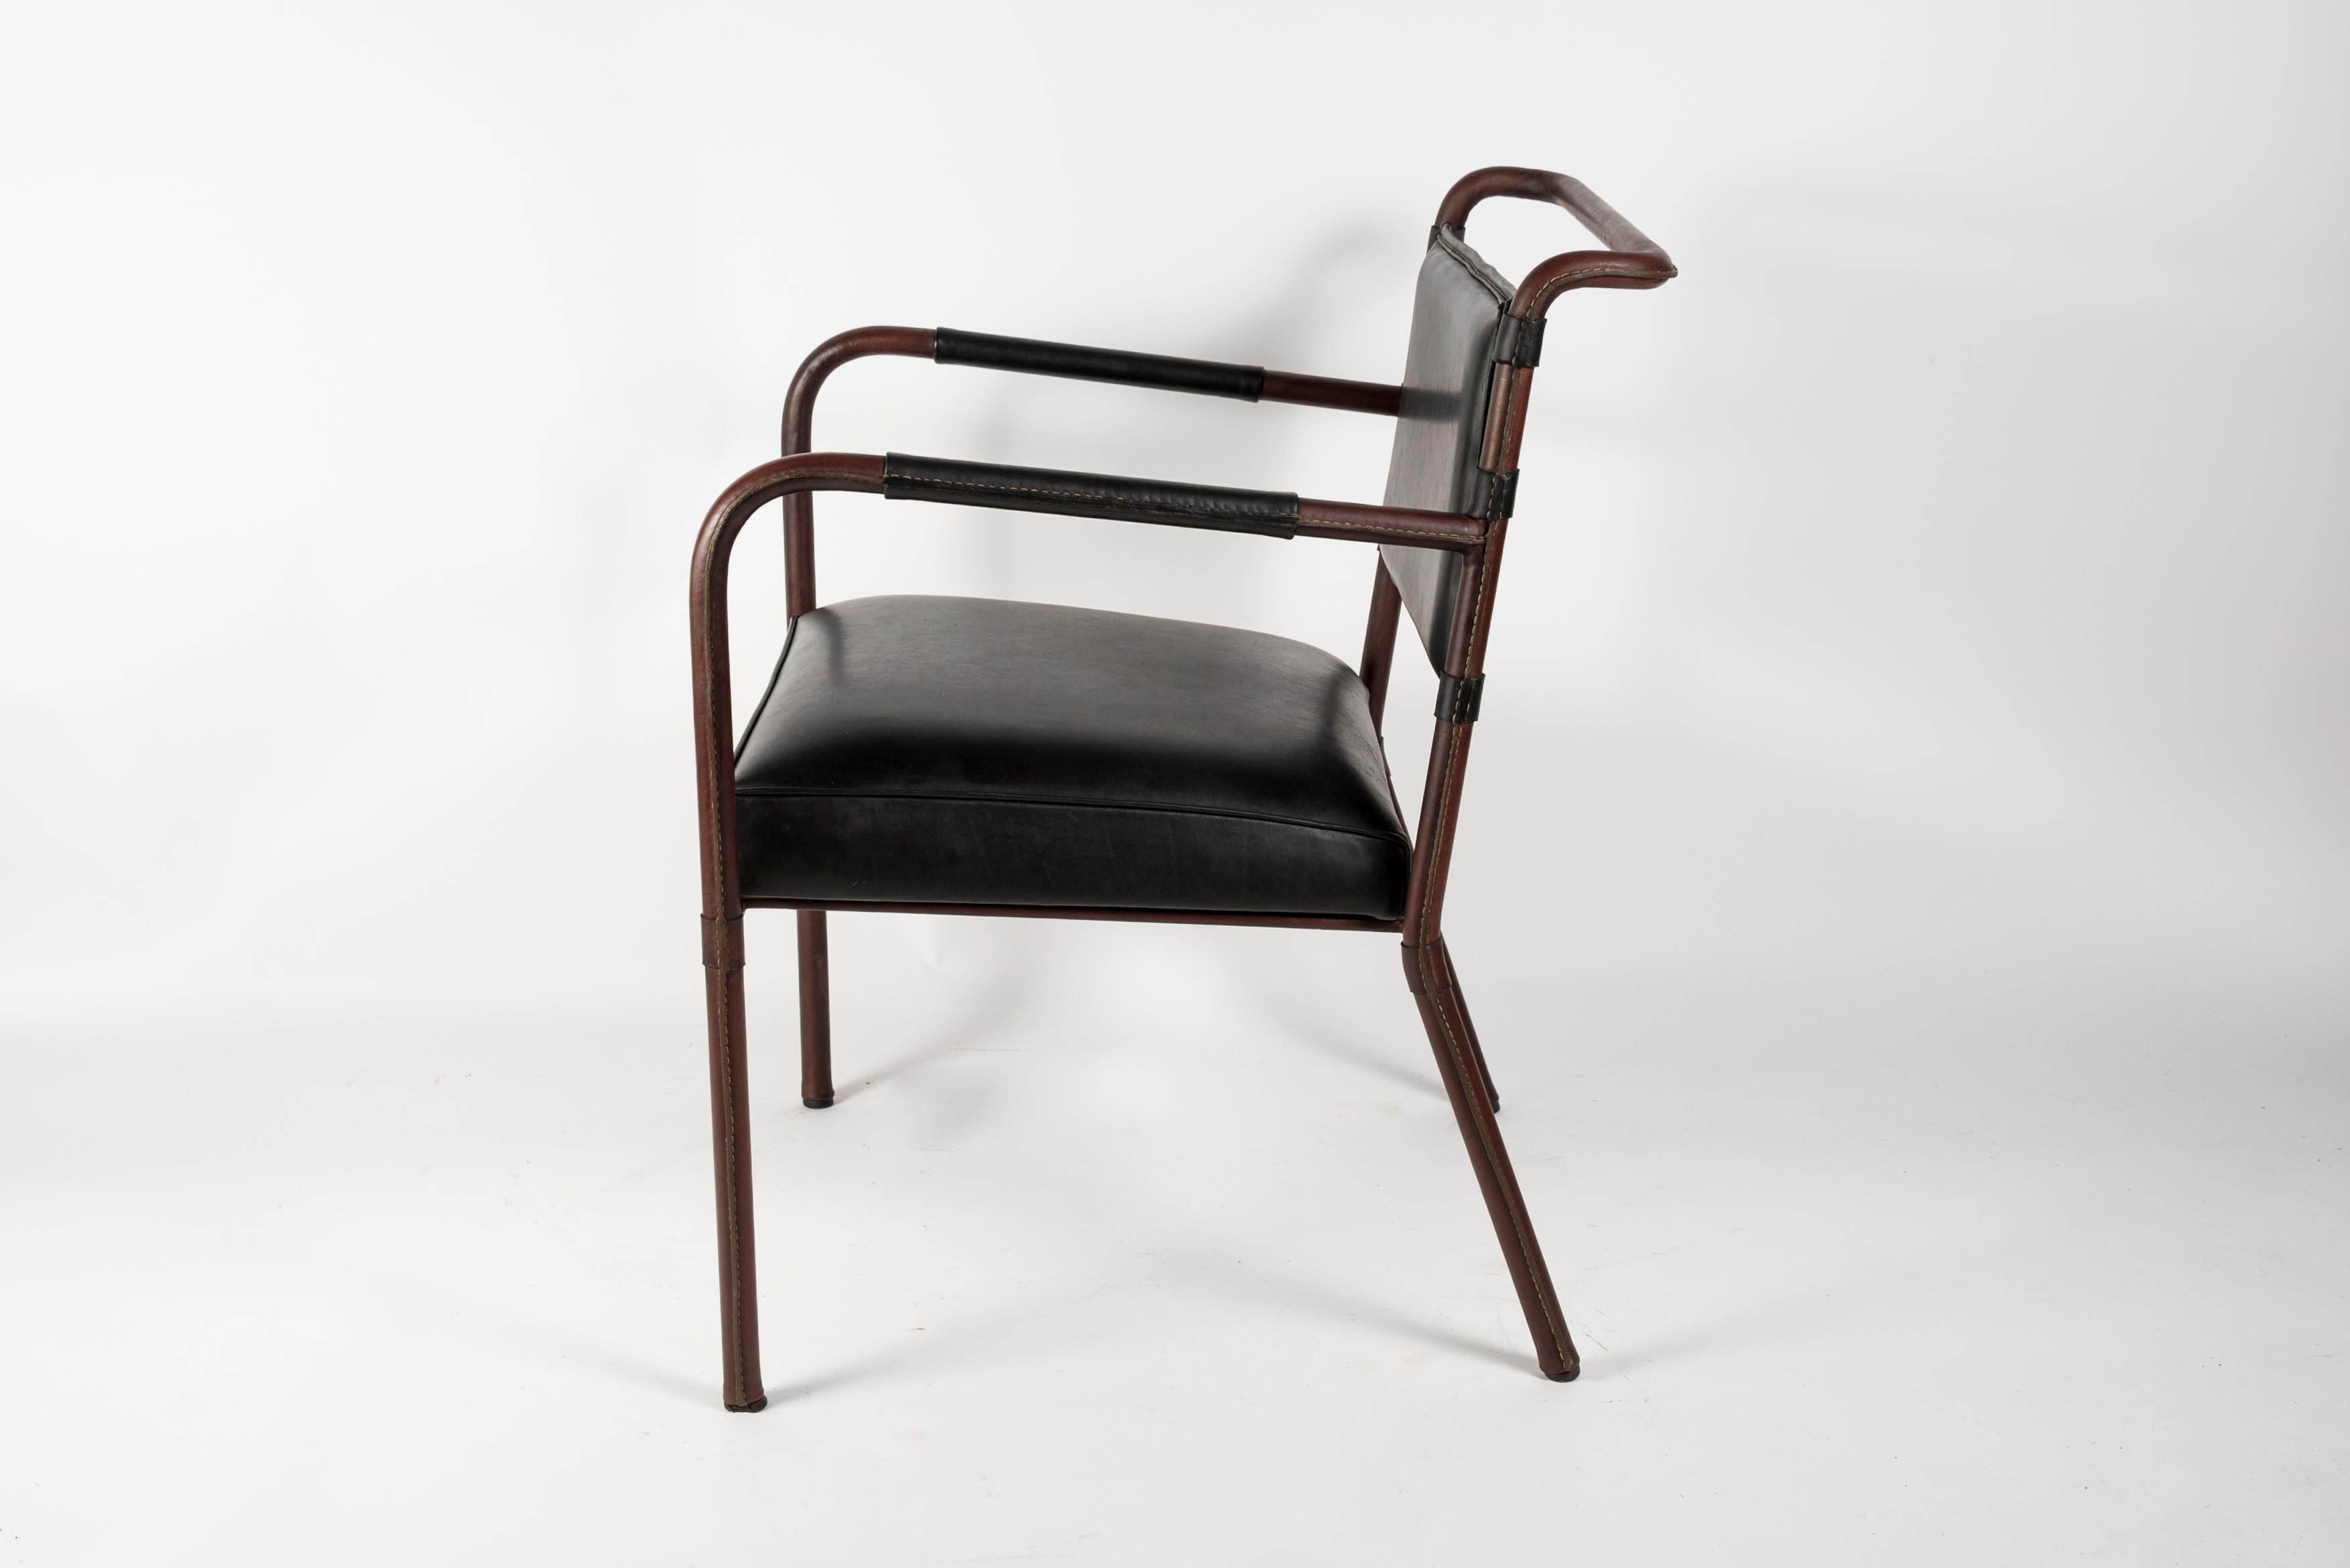 1950's Stitched Leather armchair by Jacques adnet For Sale 2